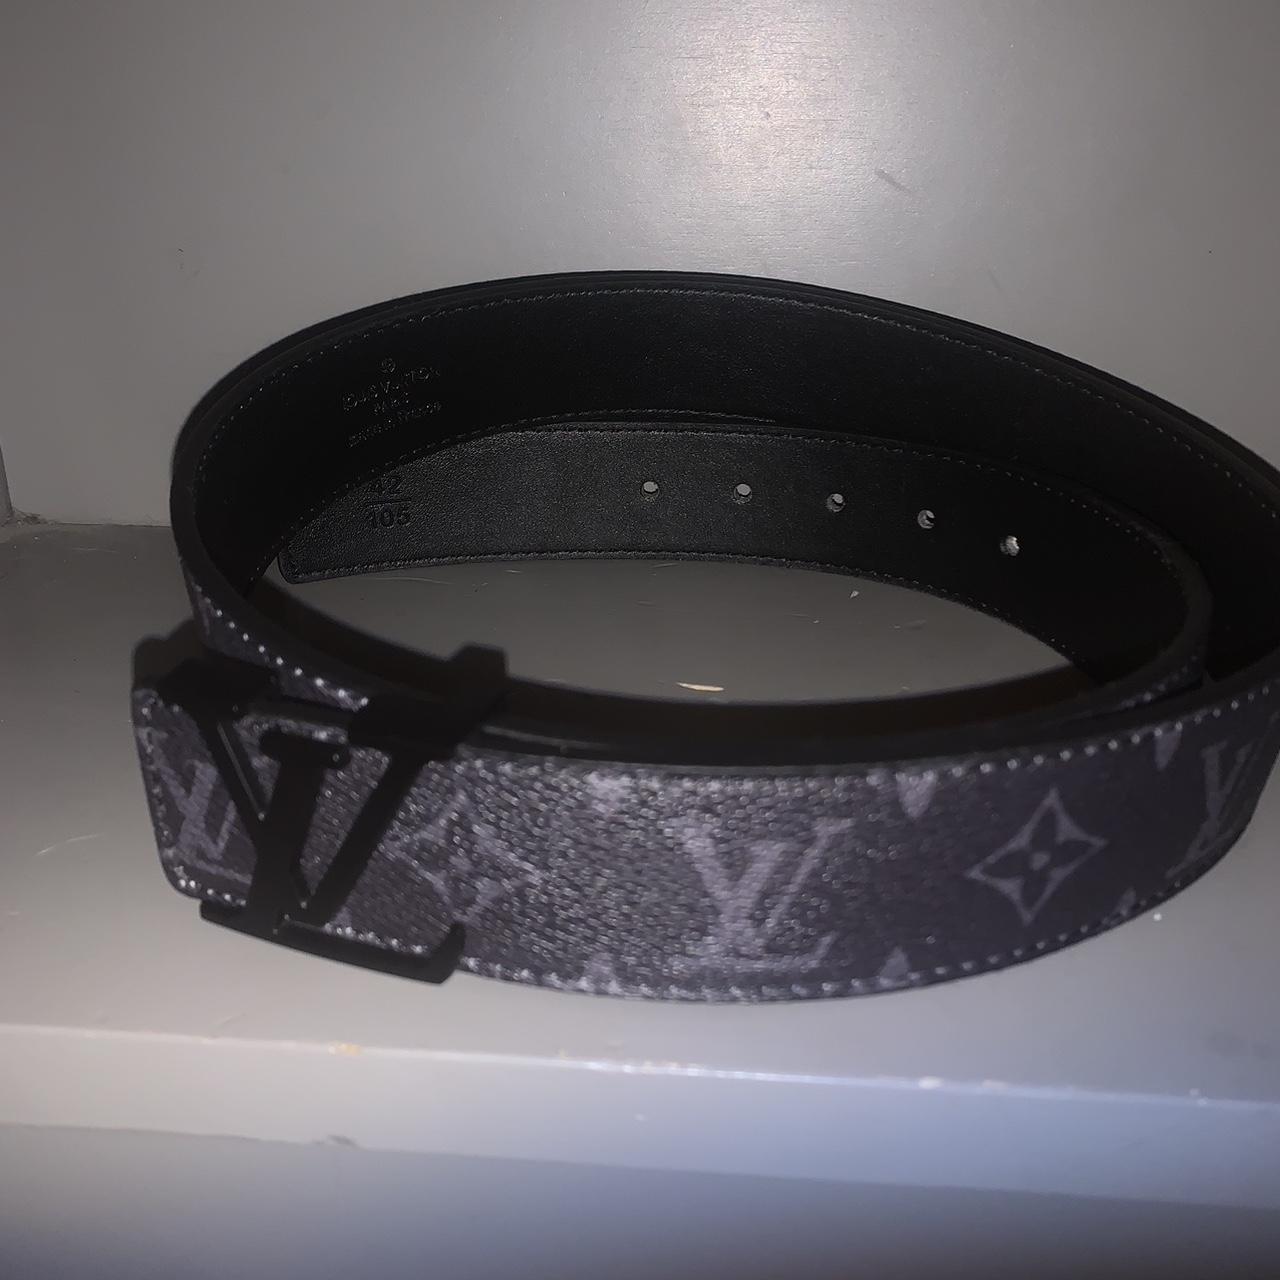 Fairly used louis vuitton belt Size: 43/120 or 36” - Depop